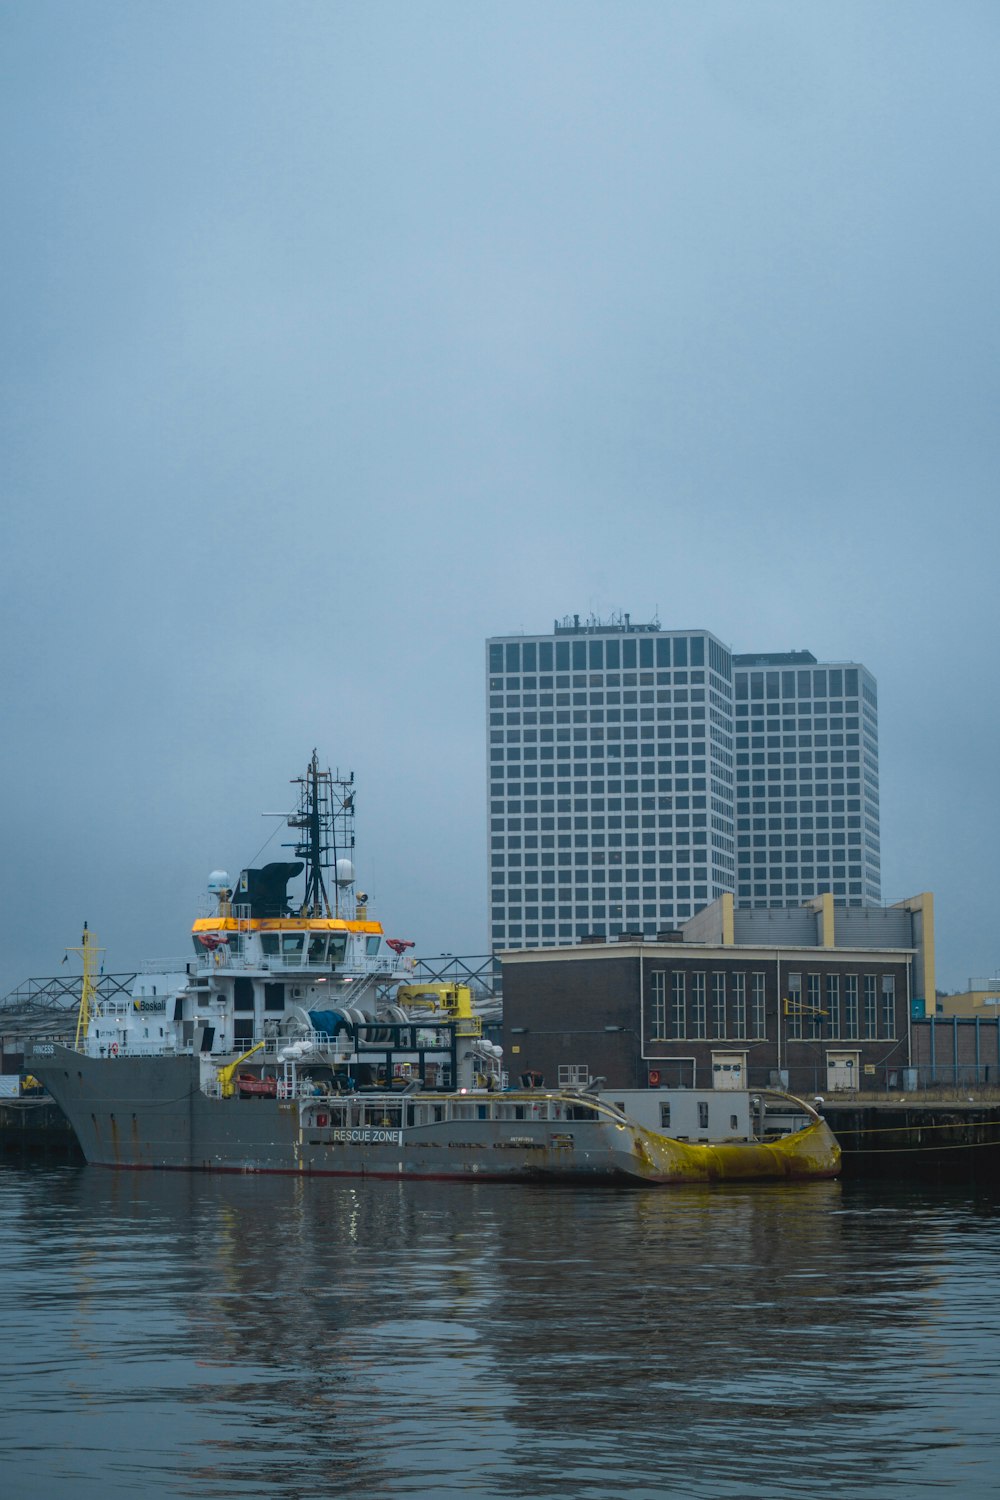 white and yellow ship on dock near city buildings during daytime